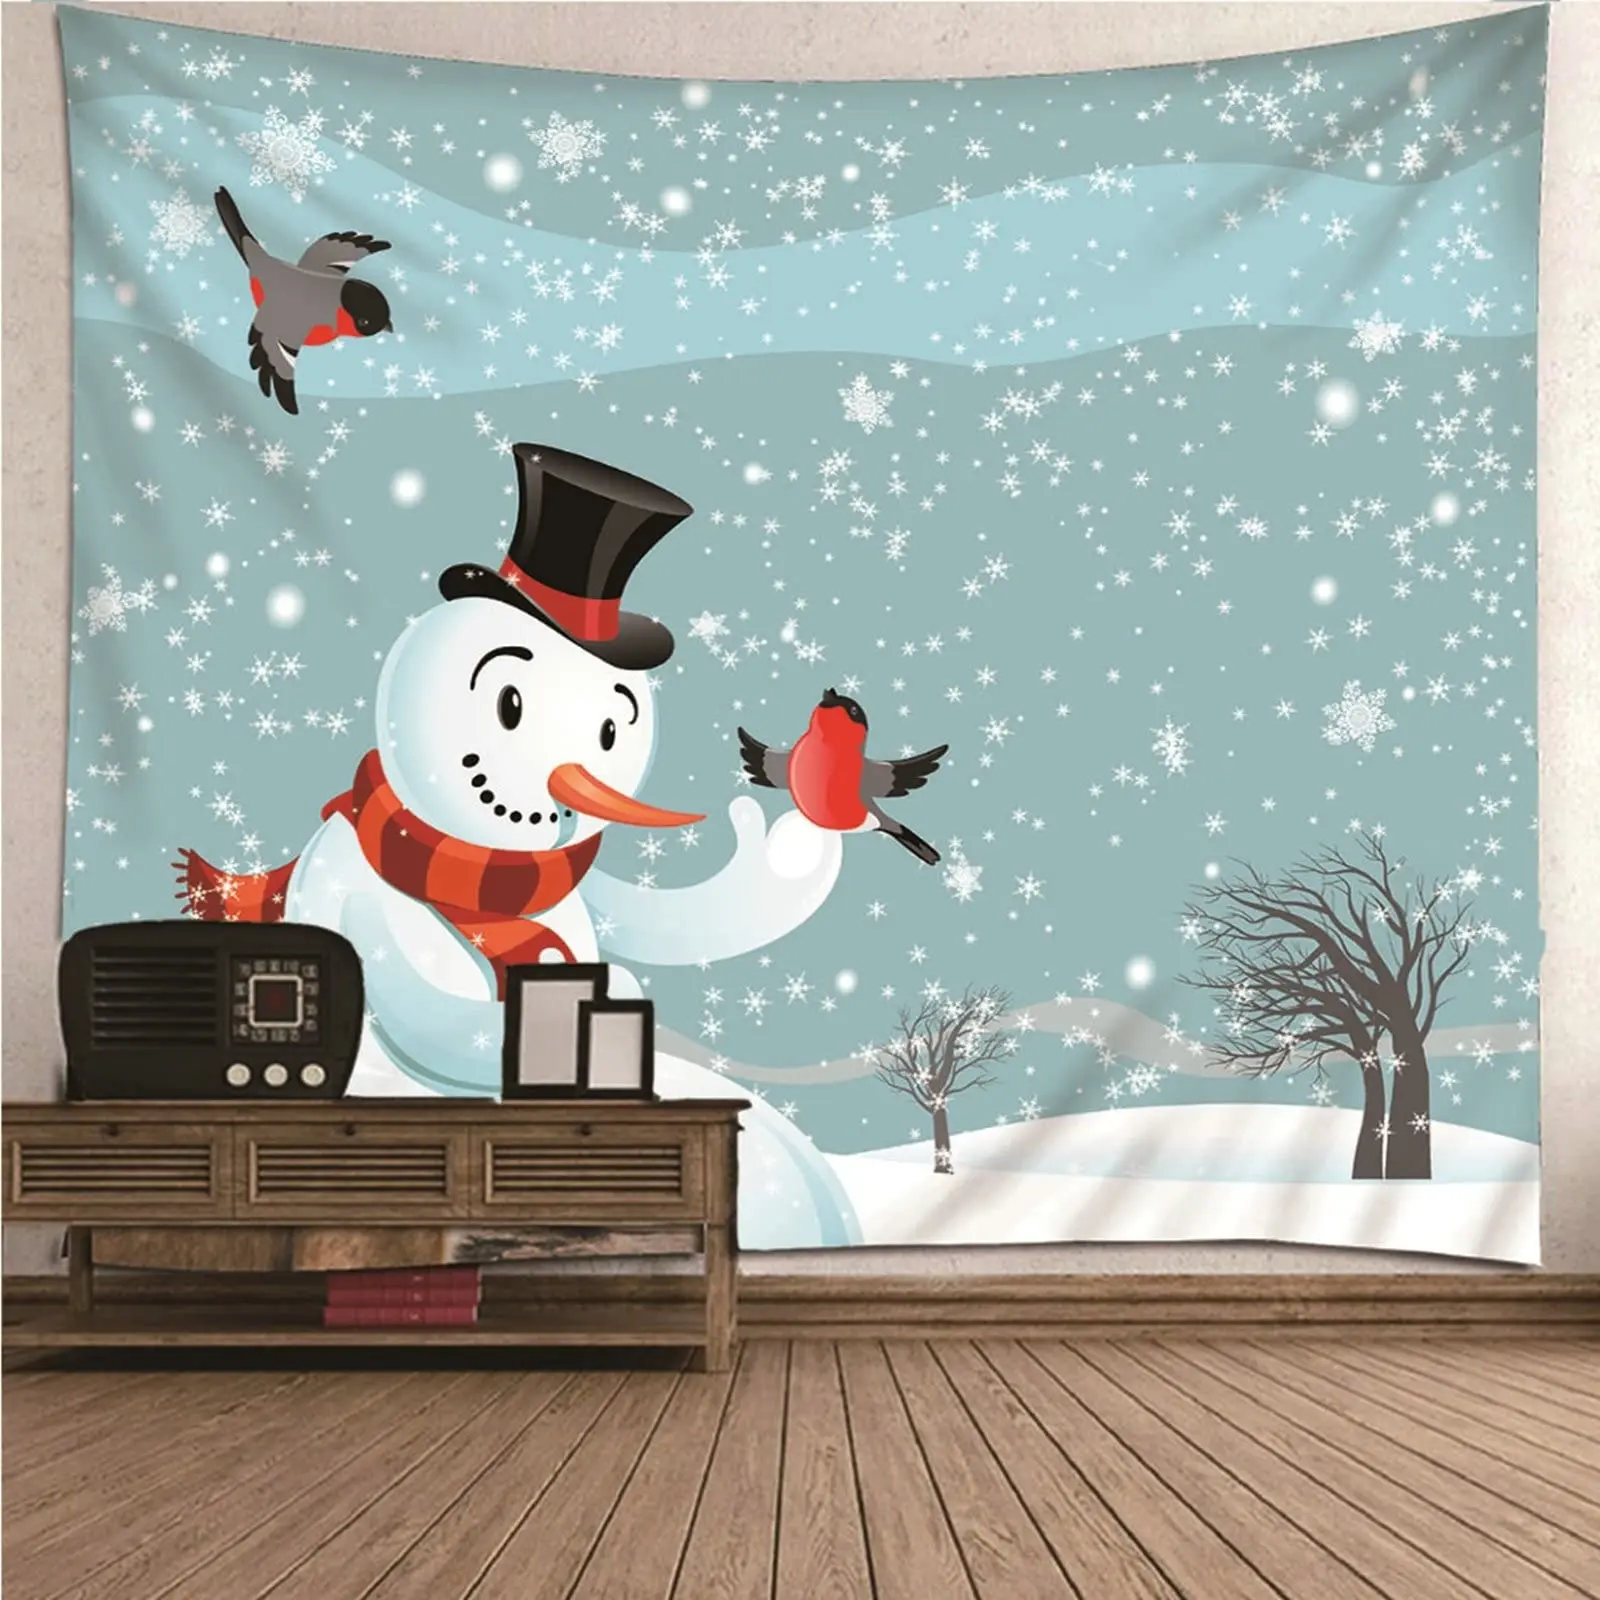 

Snowman Snowflake Merry Christmas Tapestry New Year Winter Party Tapestry Wall Hanging Decor for Home Living Room Bedroom Dorm